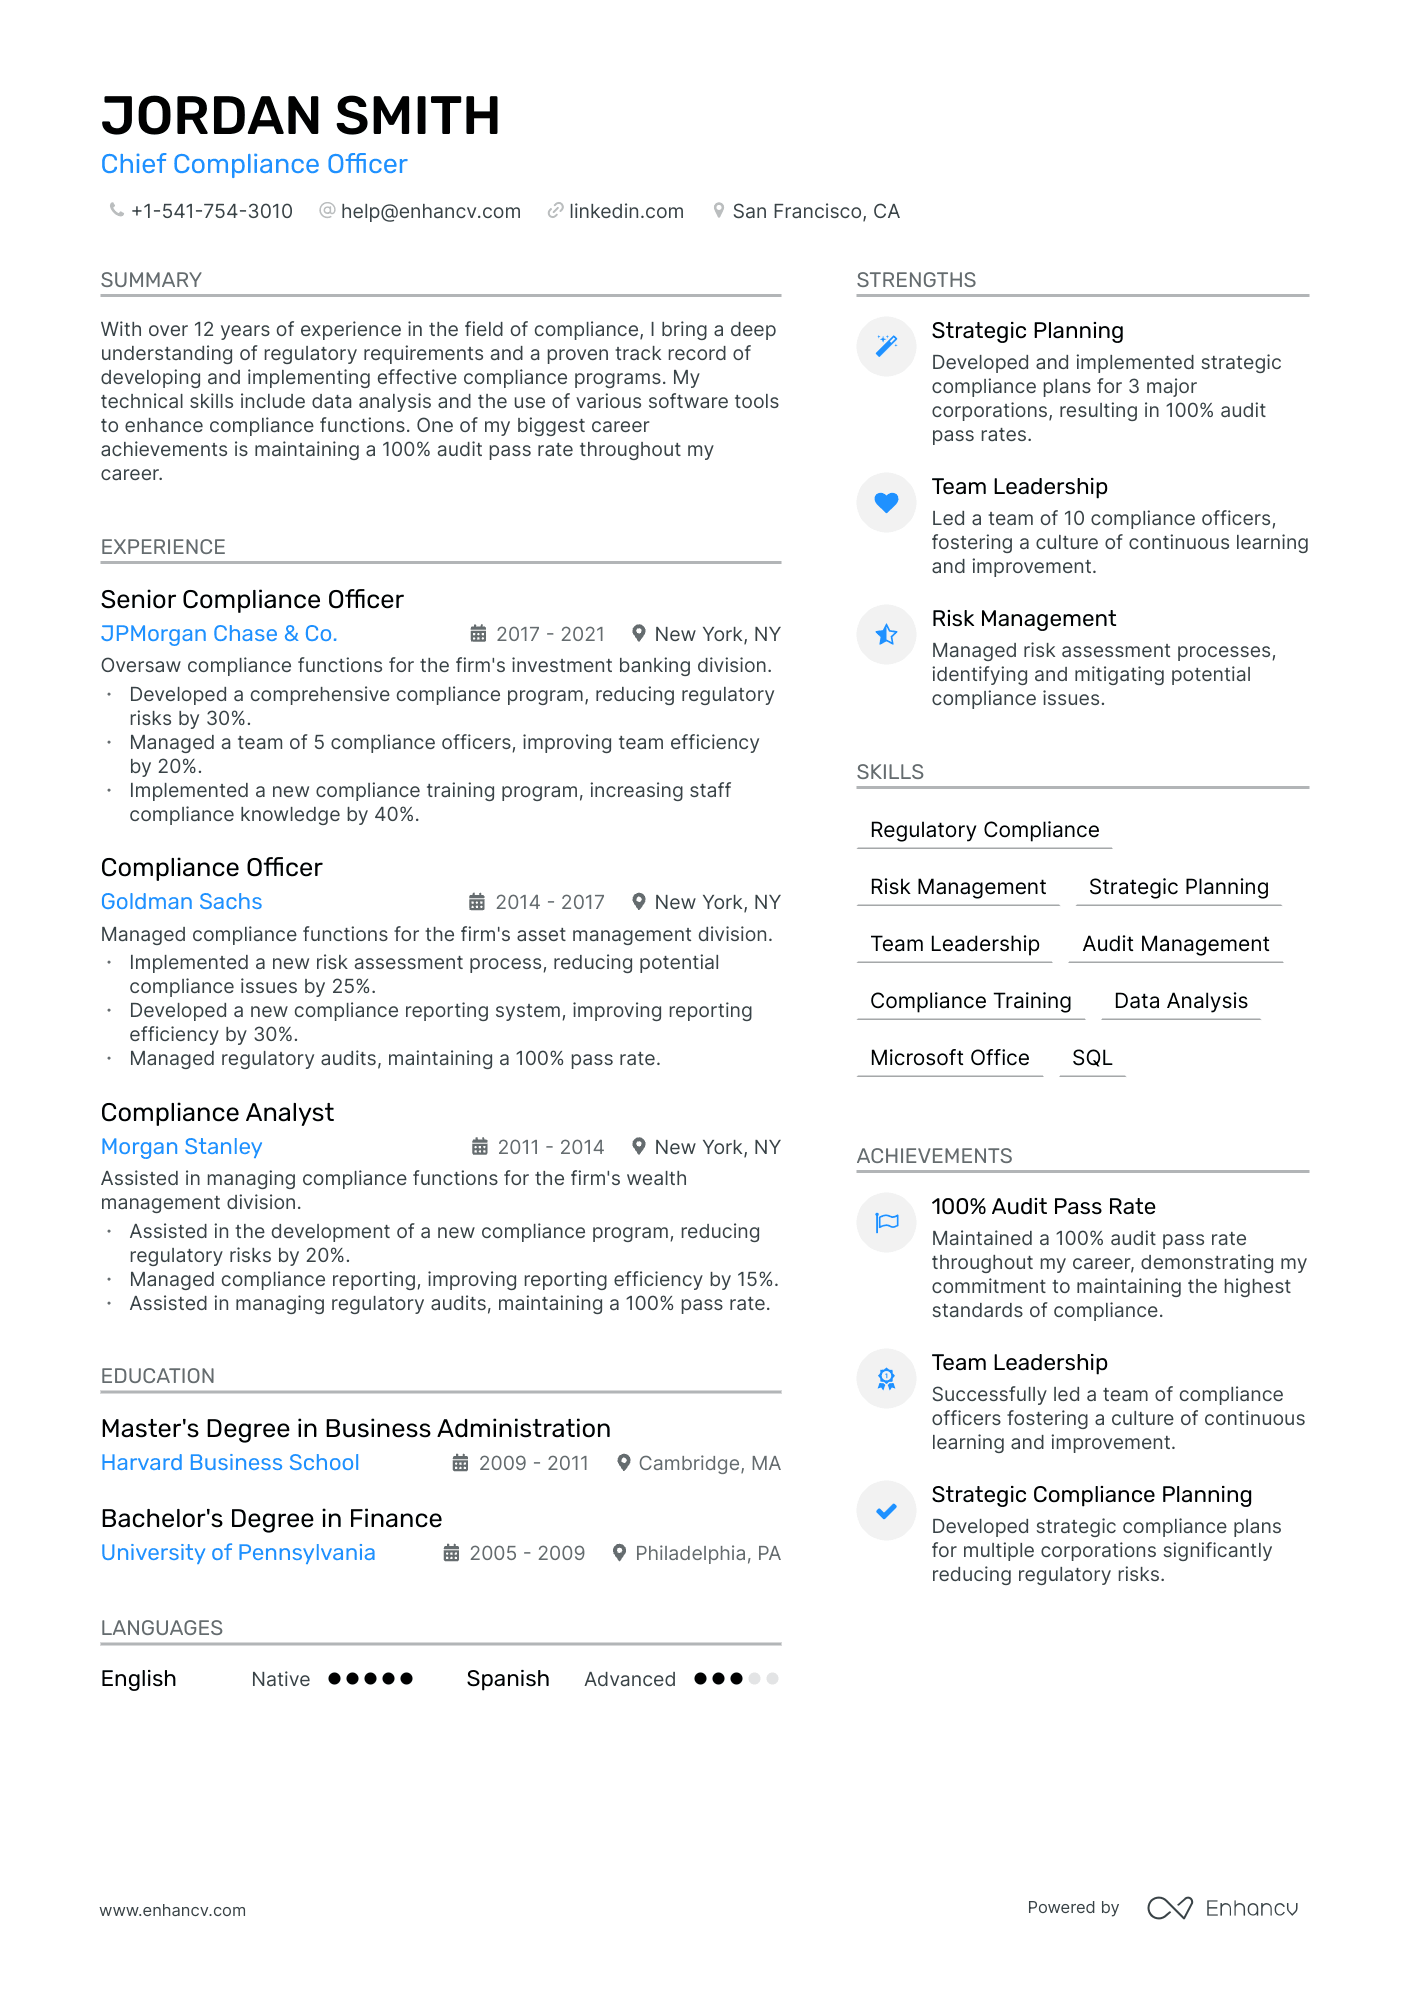 Chief Compliance Officer resume example